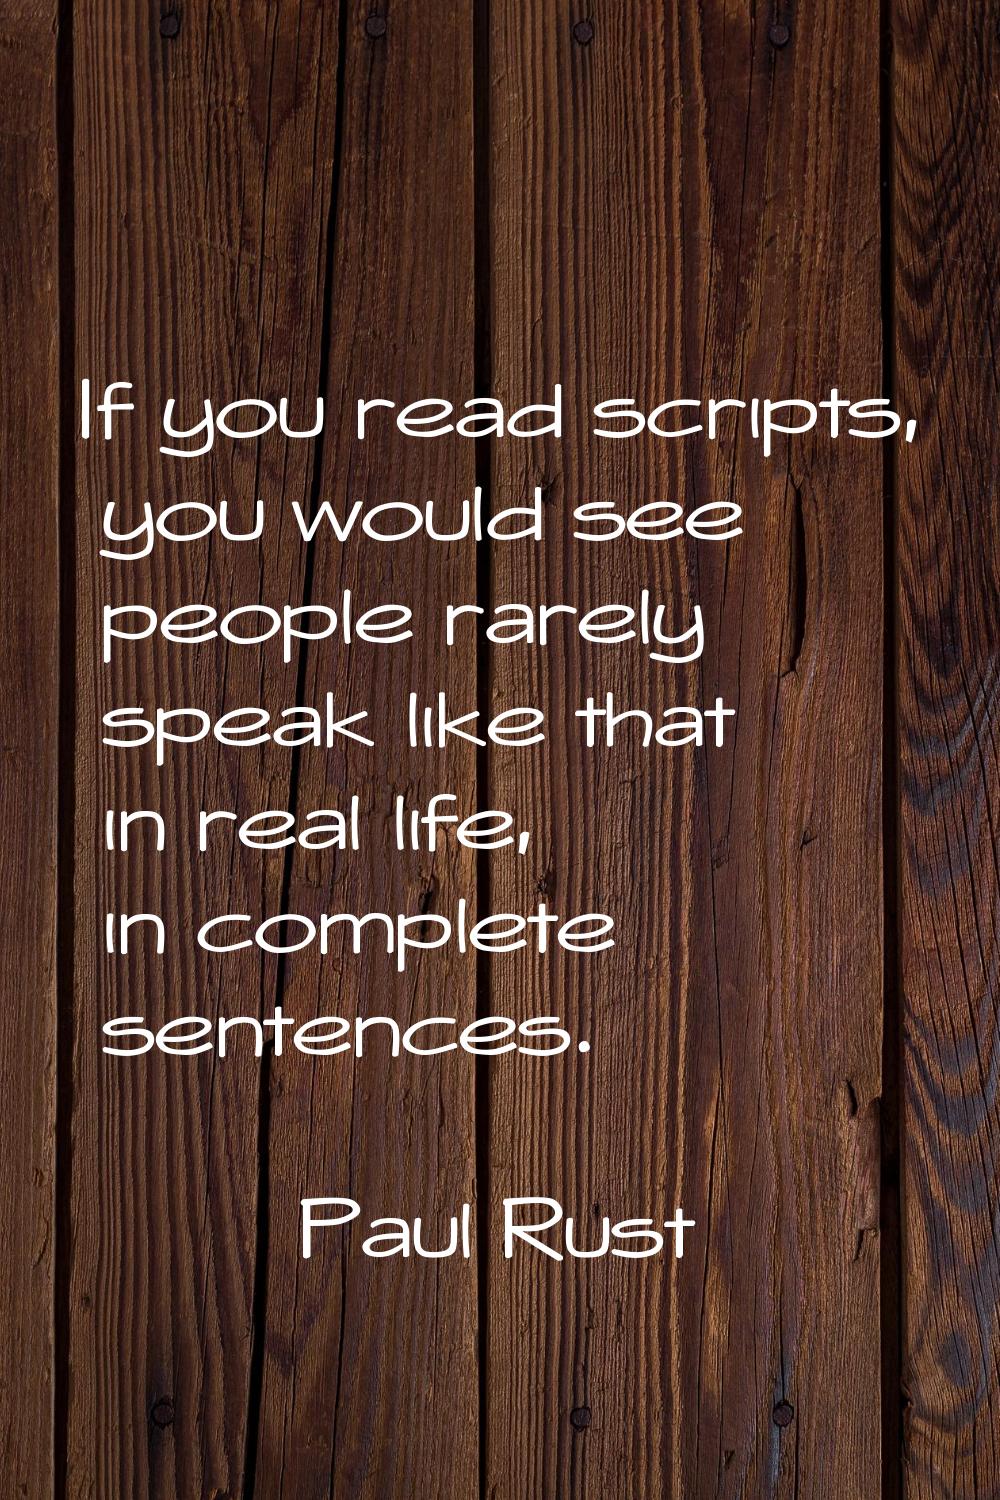 If you read scripts, you would see people rarely speak like that in real life, in complete sentence